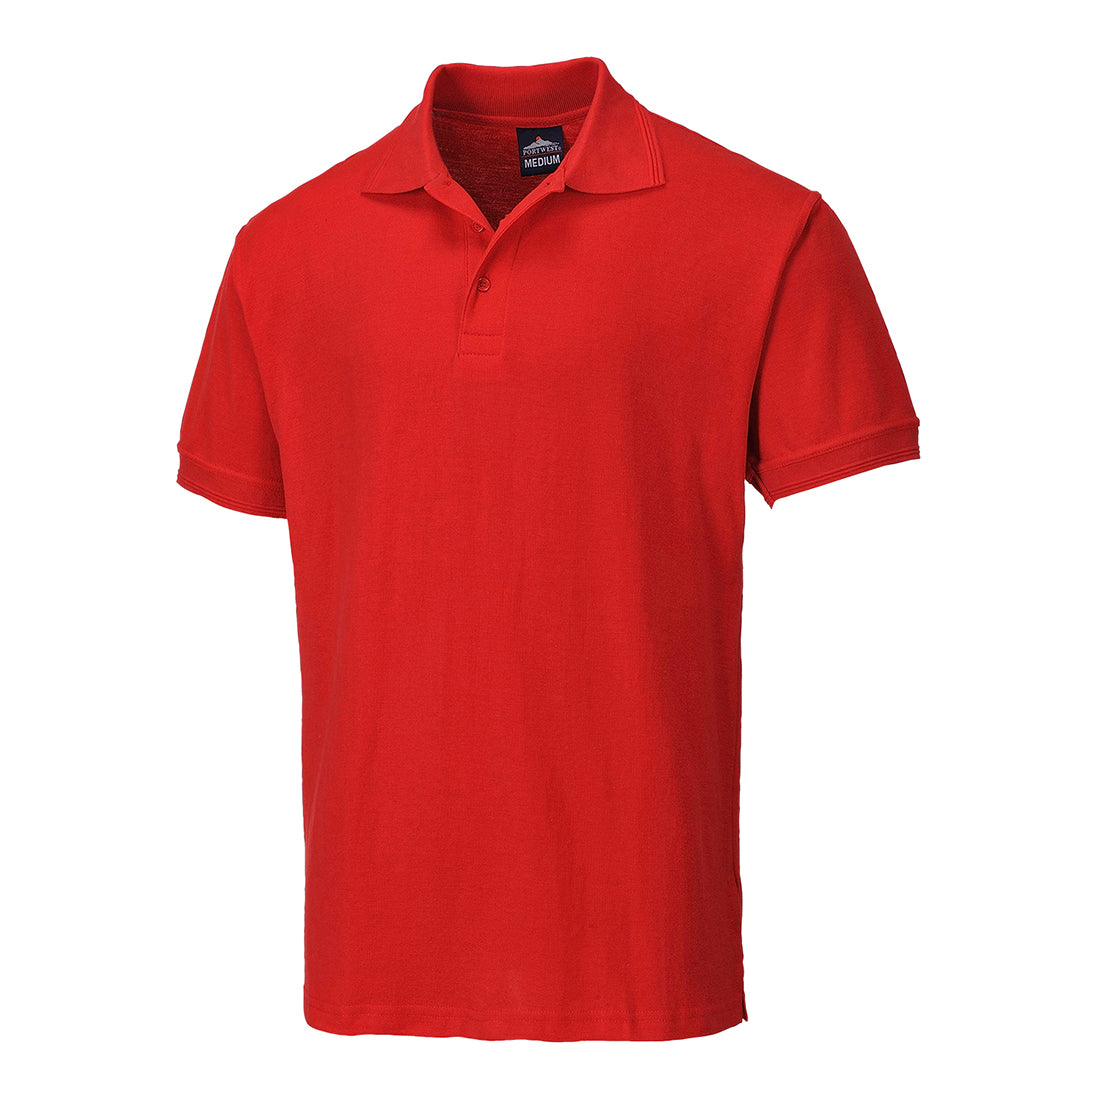 Naples Polo Shirt- B210 Red front